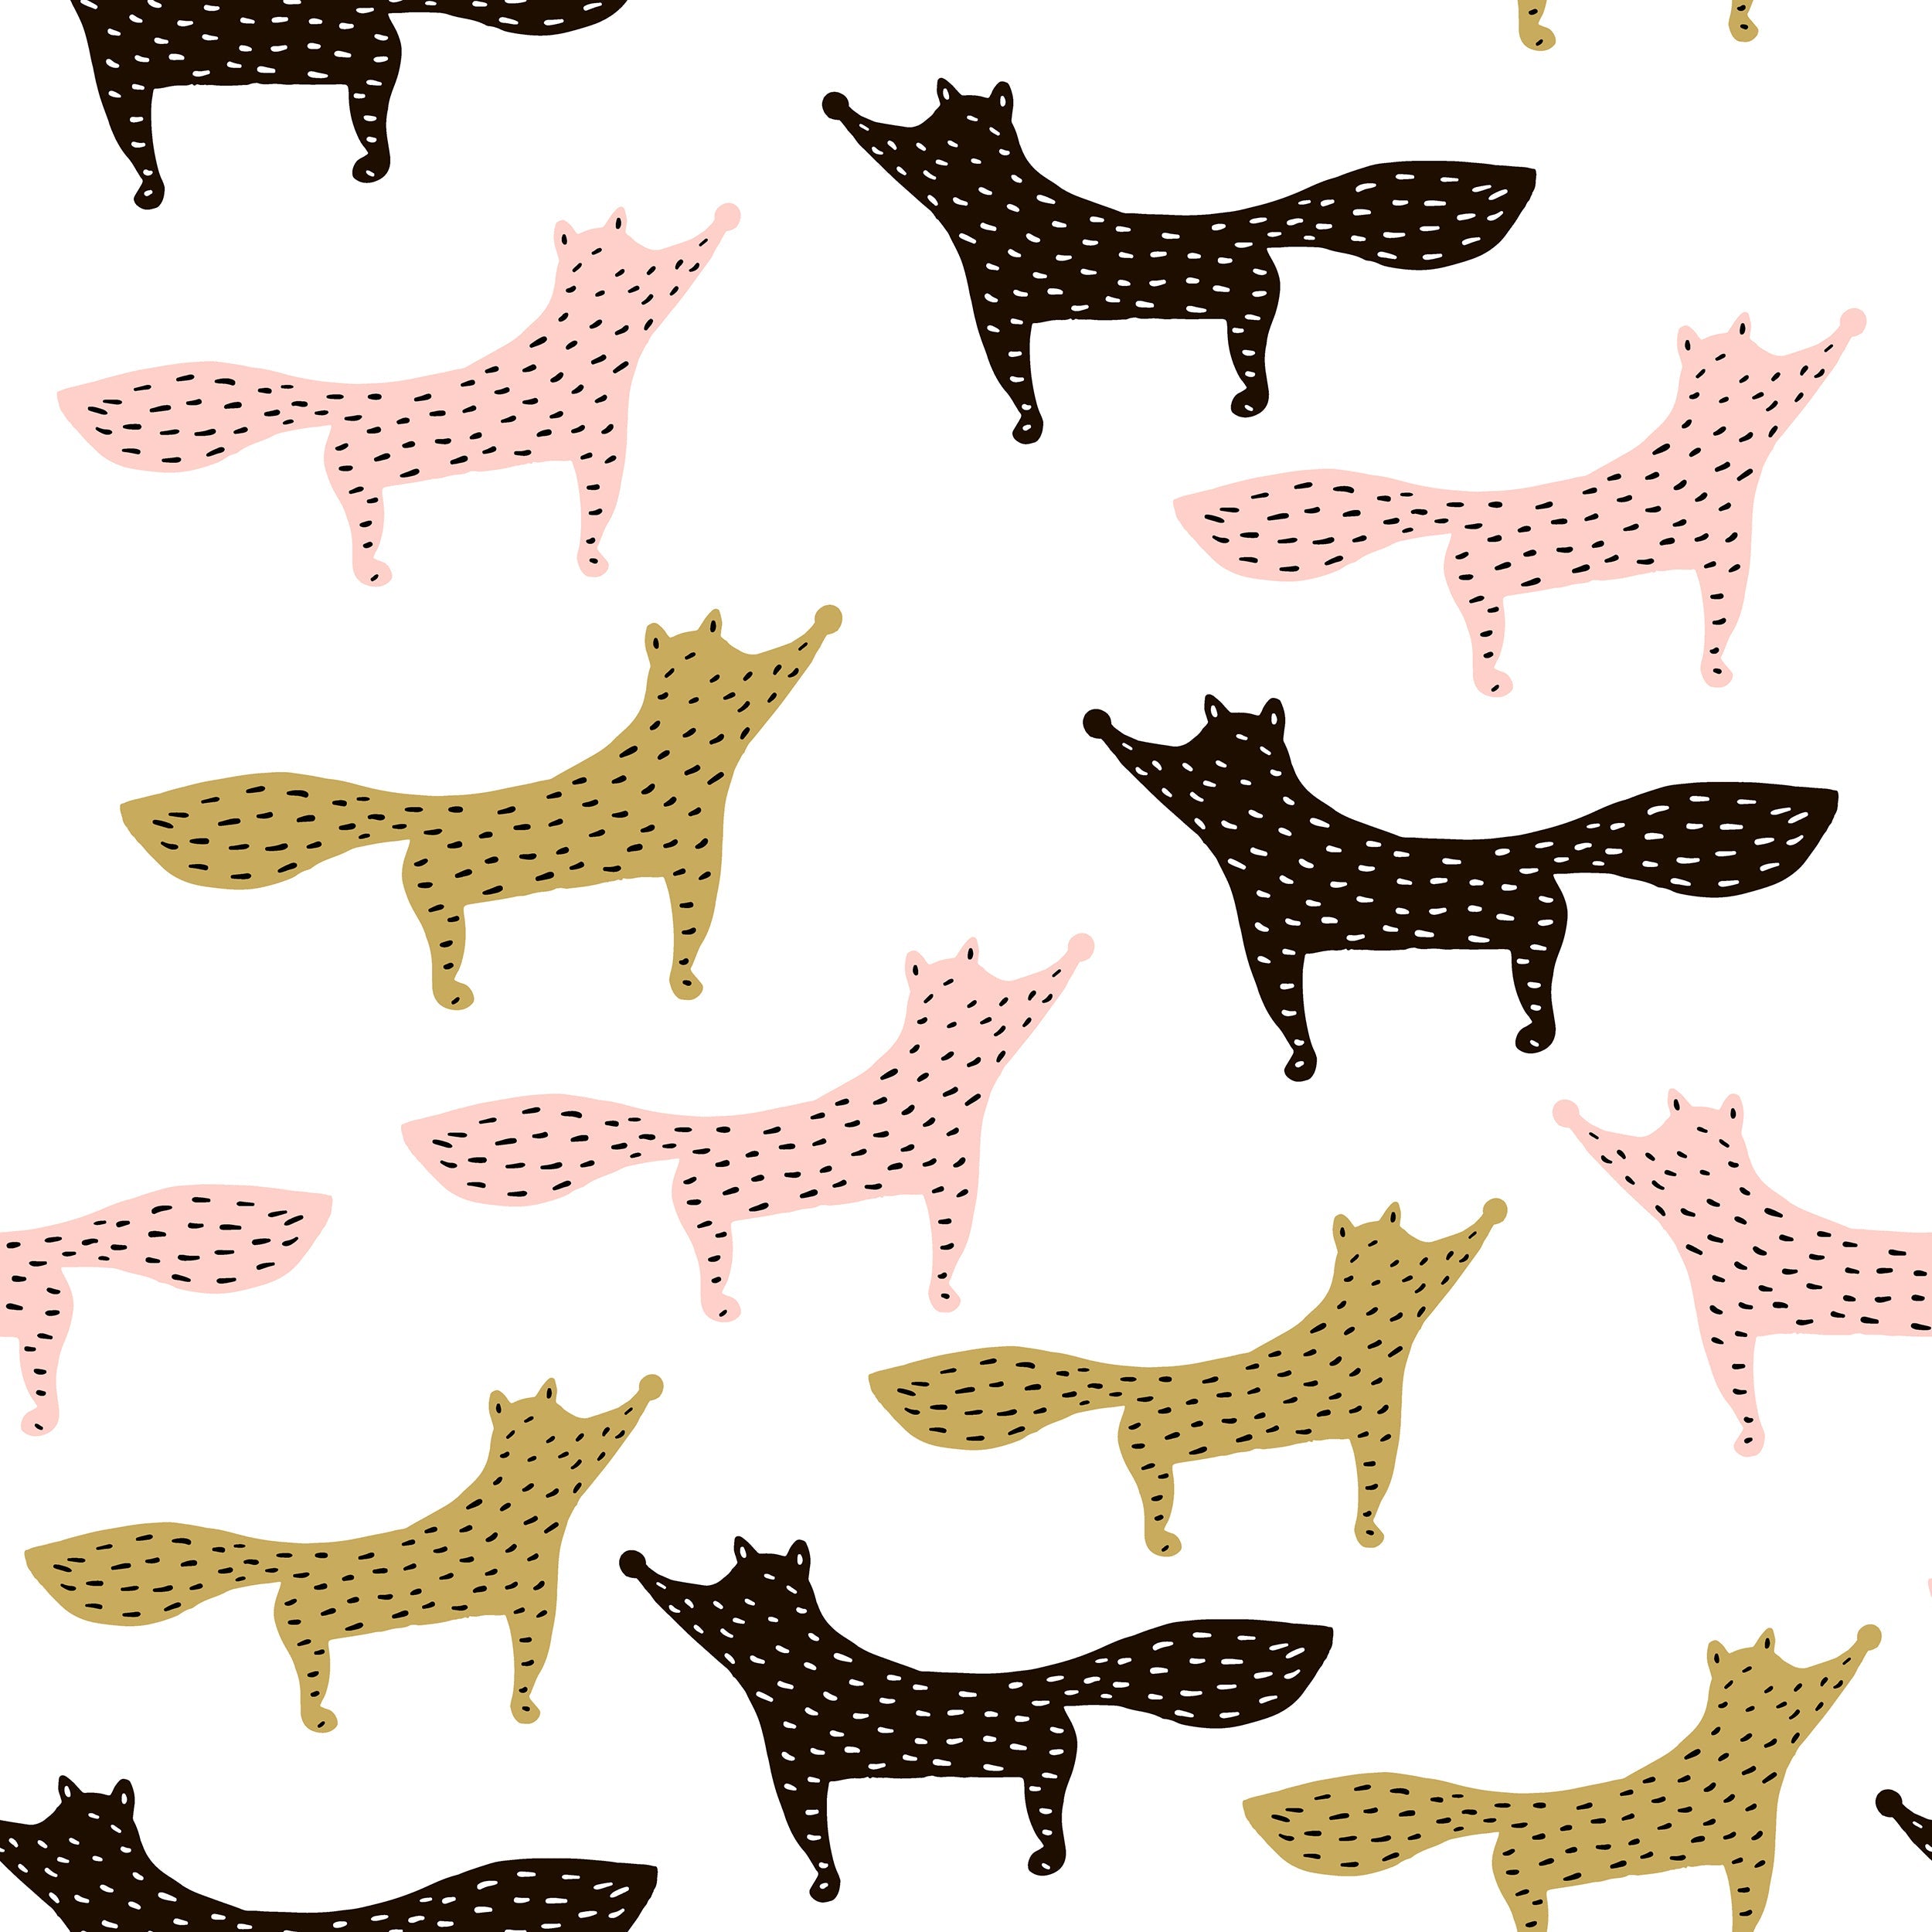 A playful pattern of illustrated foxes in colors of pink, yellow, and black, set against a white background. Each fox is stylized with polka dots and simple line details, adding a whimsical touch to this charming wallpaper design.